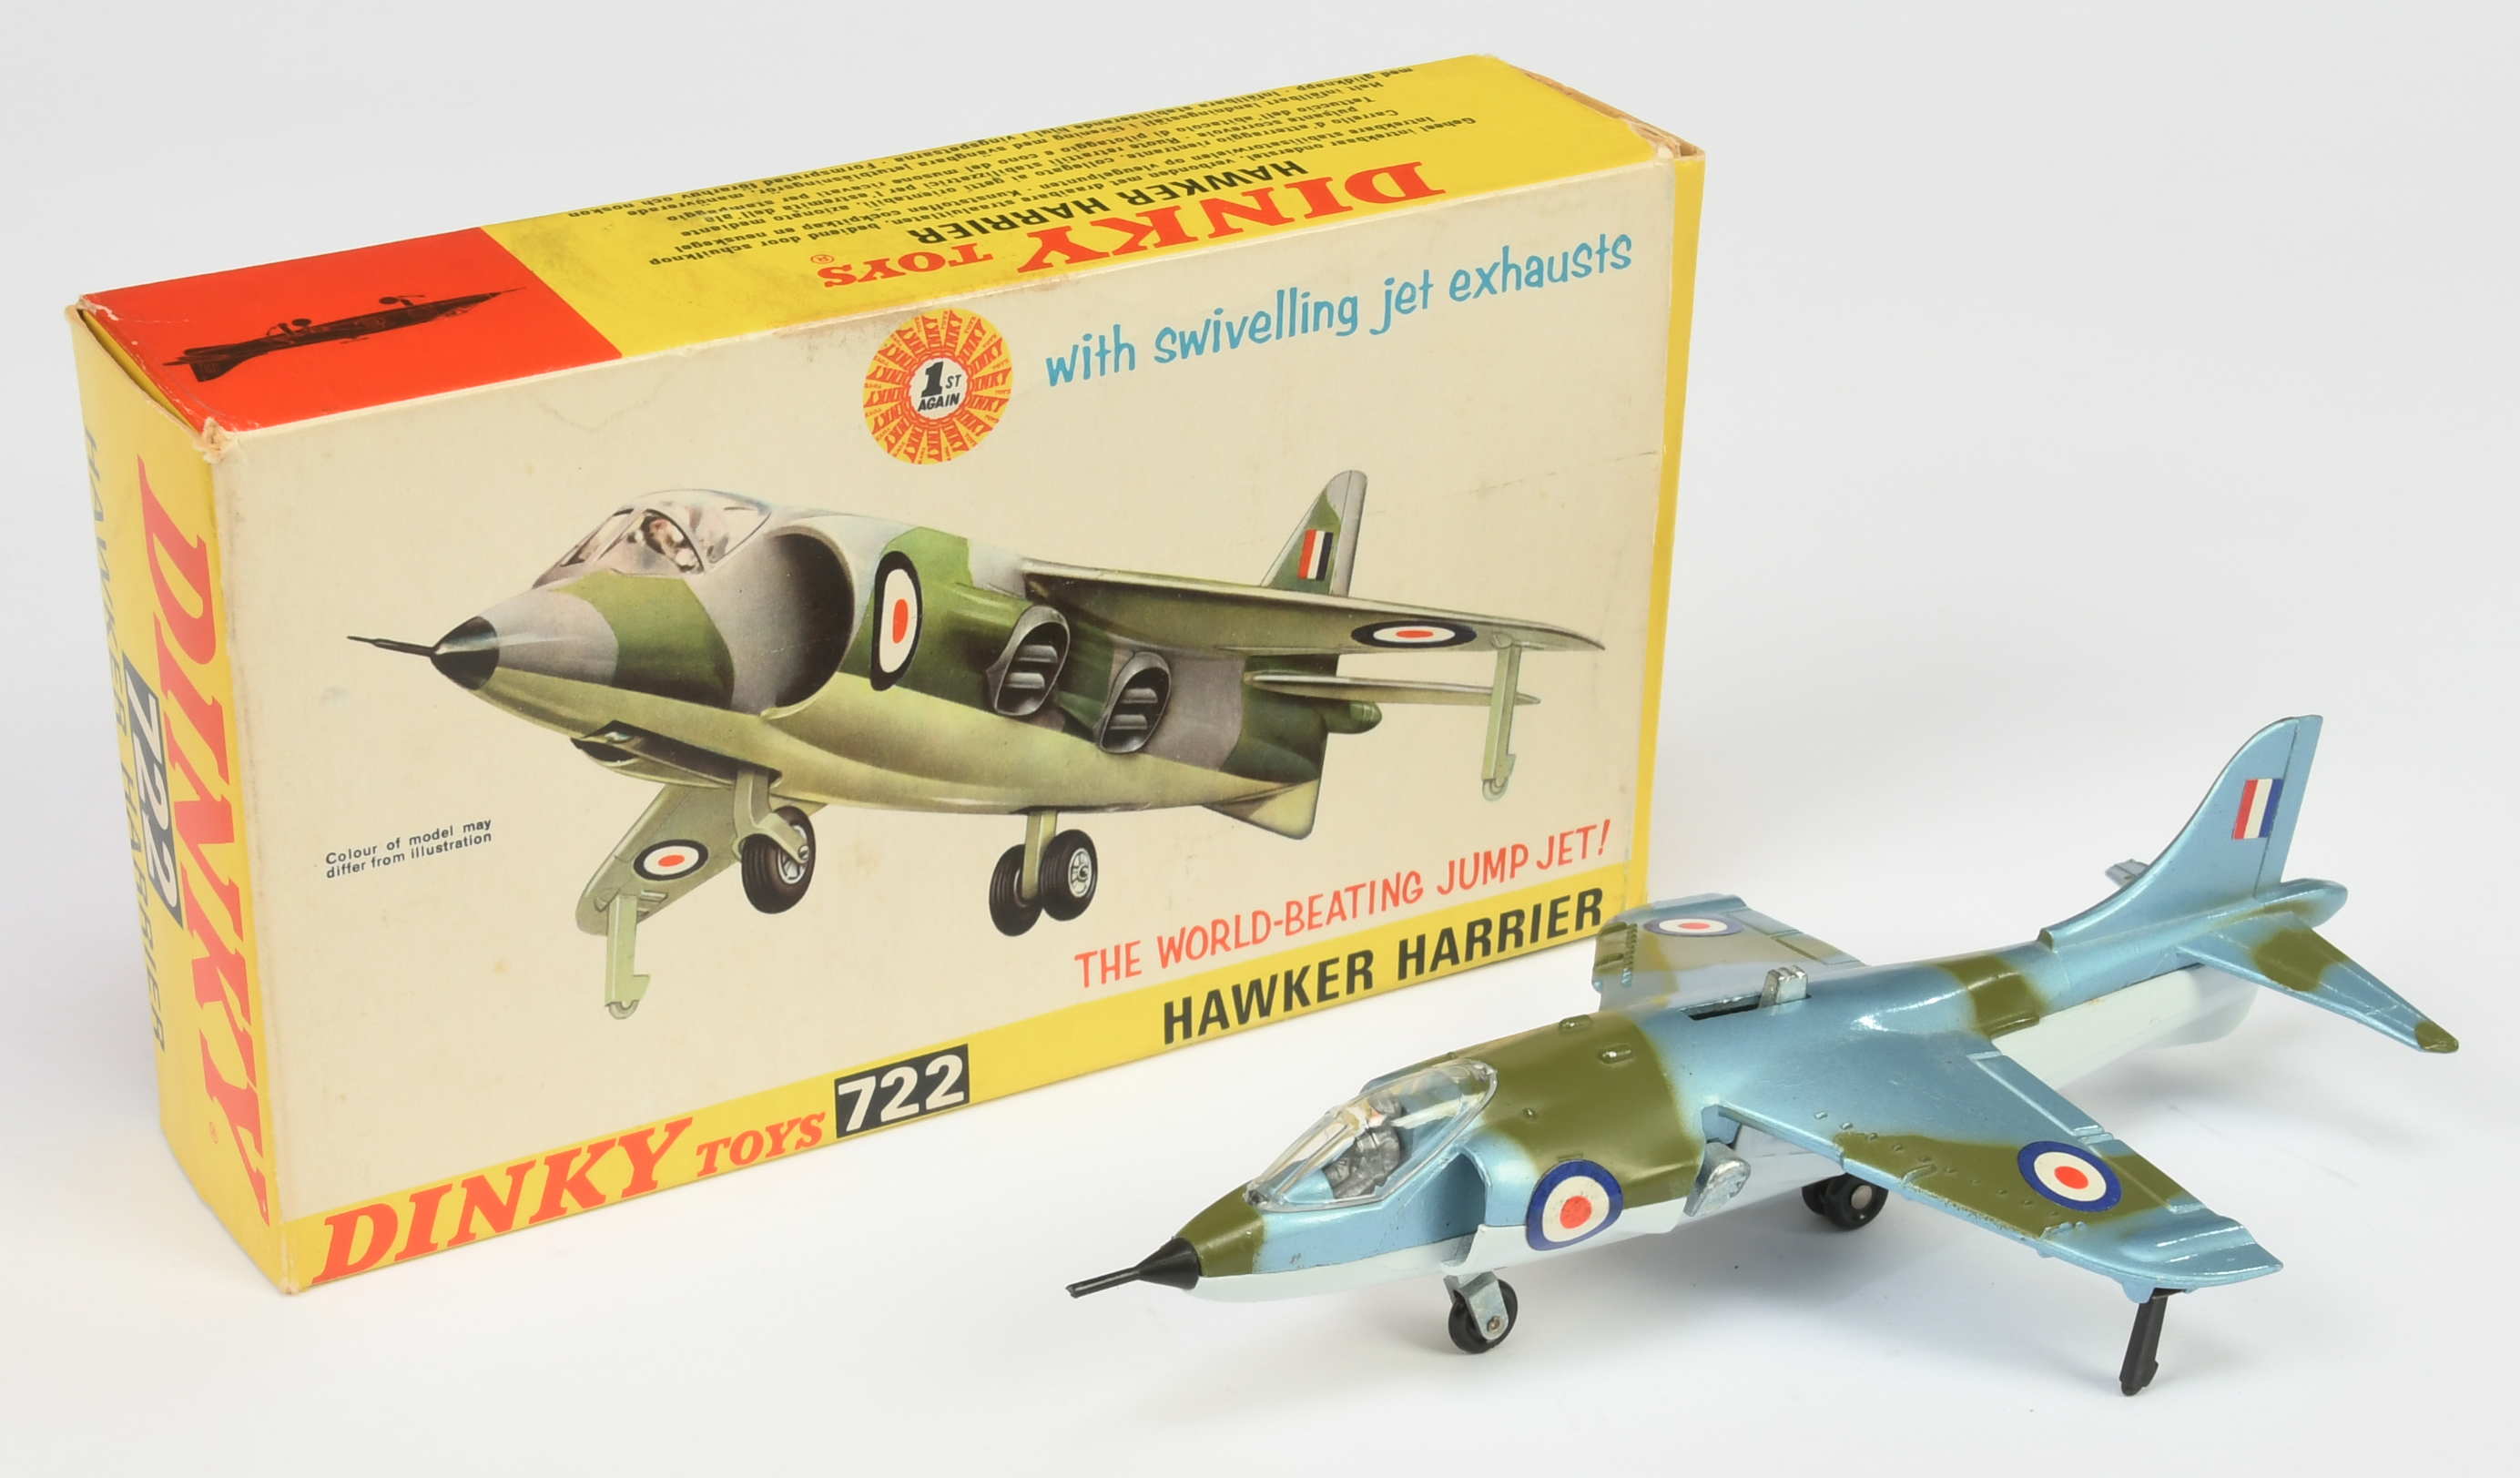 Dinky Toys Aircraft 722 Hawker Hawker - blue and green camouflage finish with pale grey base, "RA...